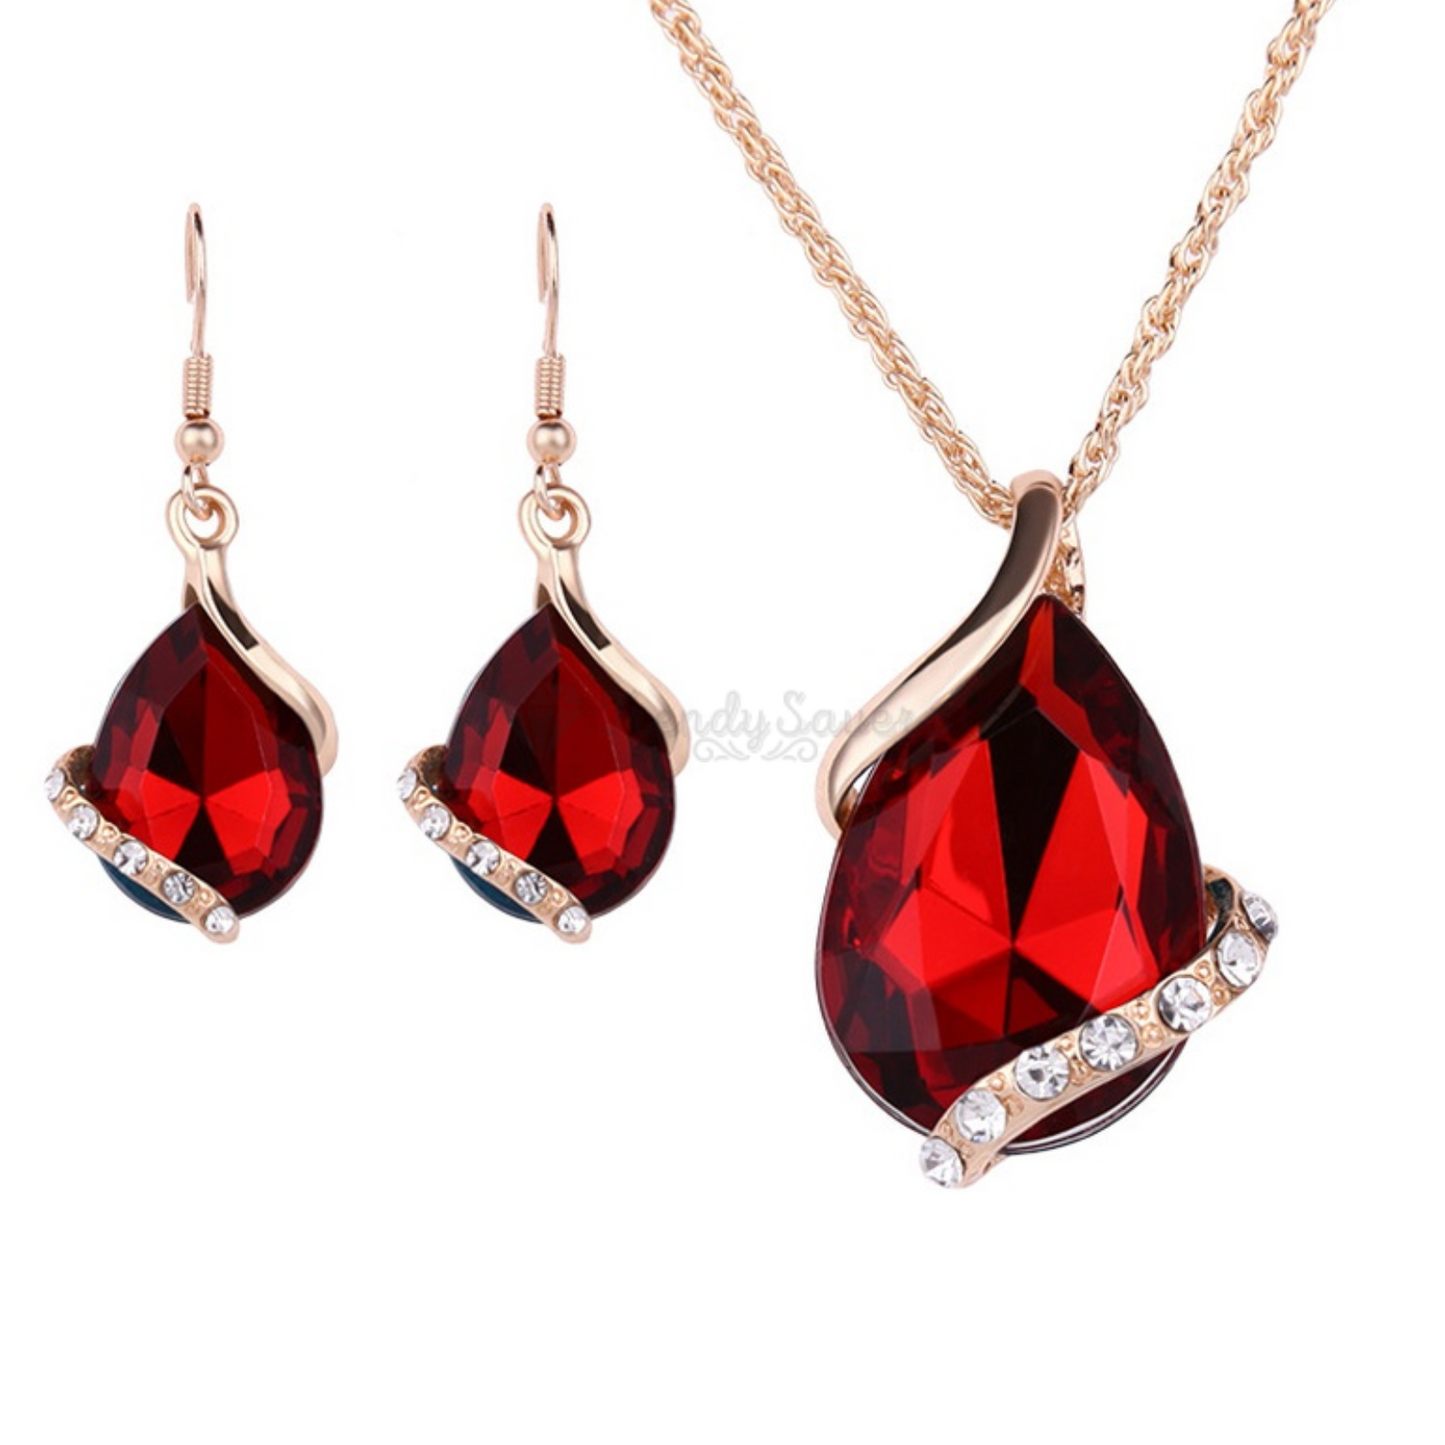 Red Crystal Pendant Necklace Dangle Drop Earrings Gold Plated Women Jewelry Set